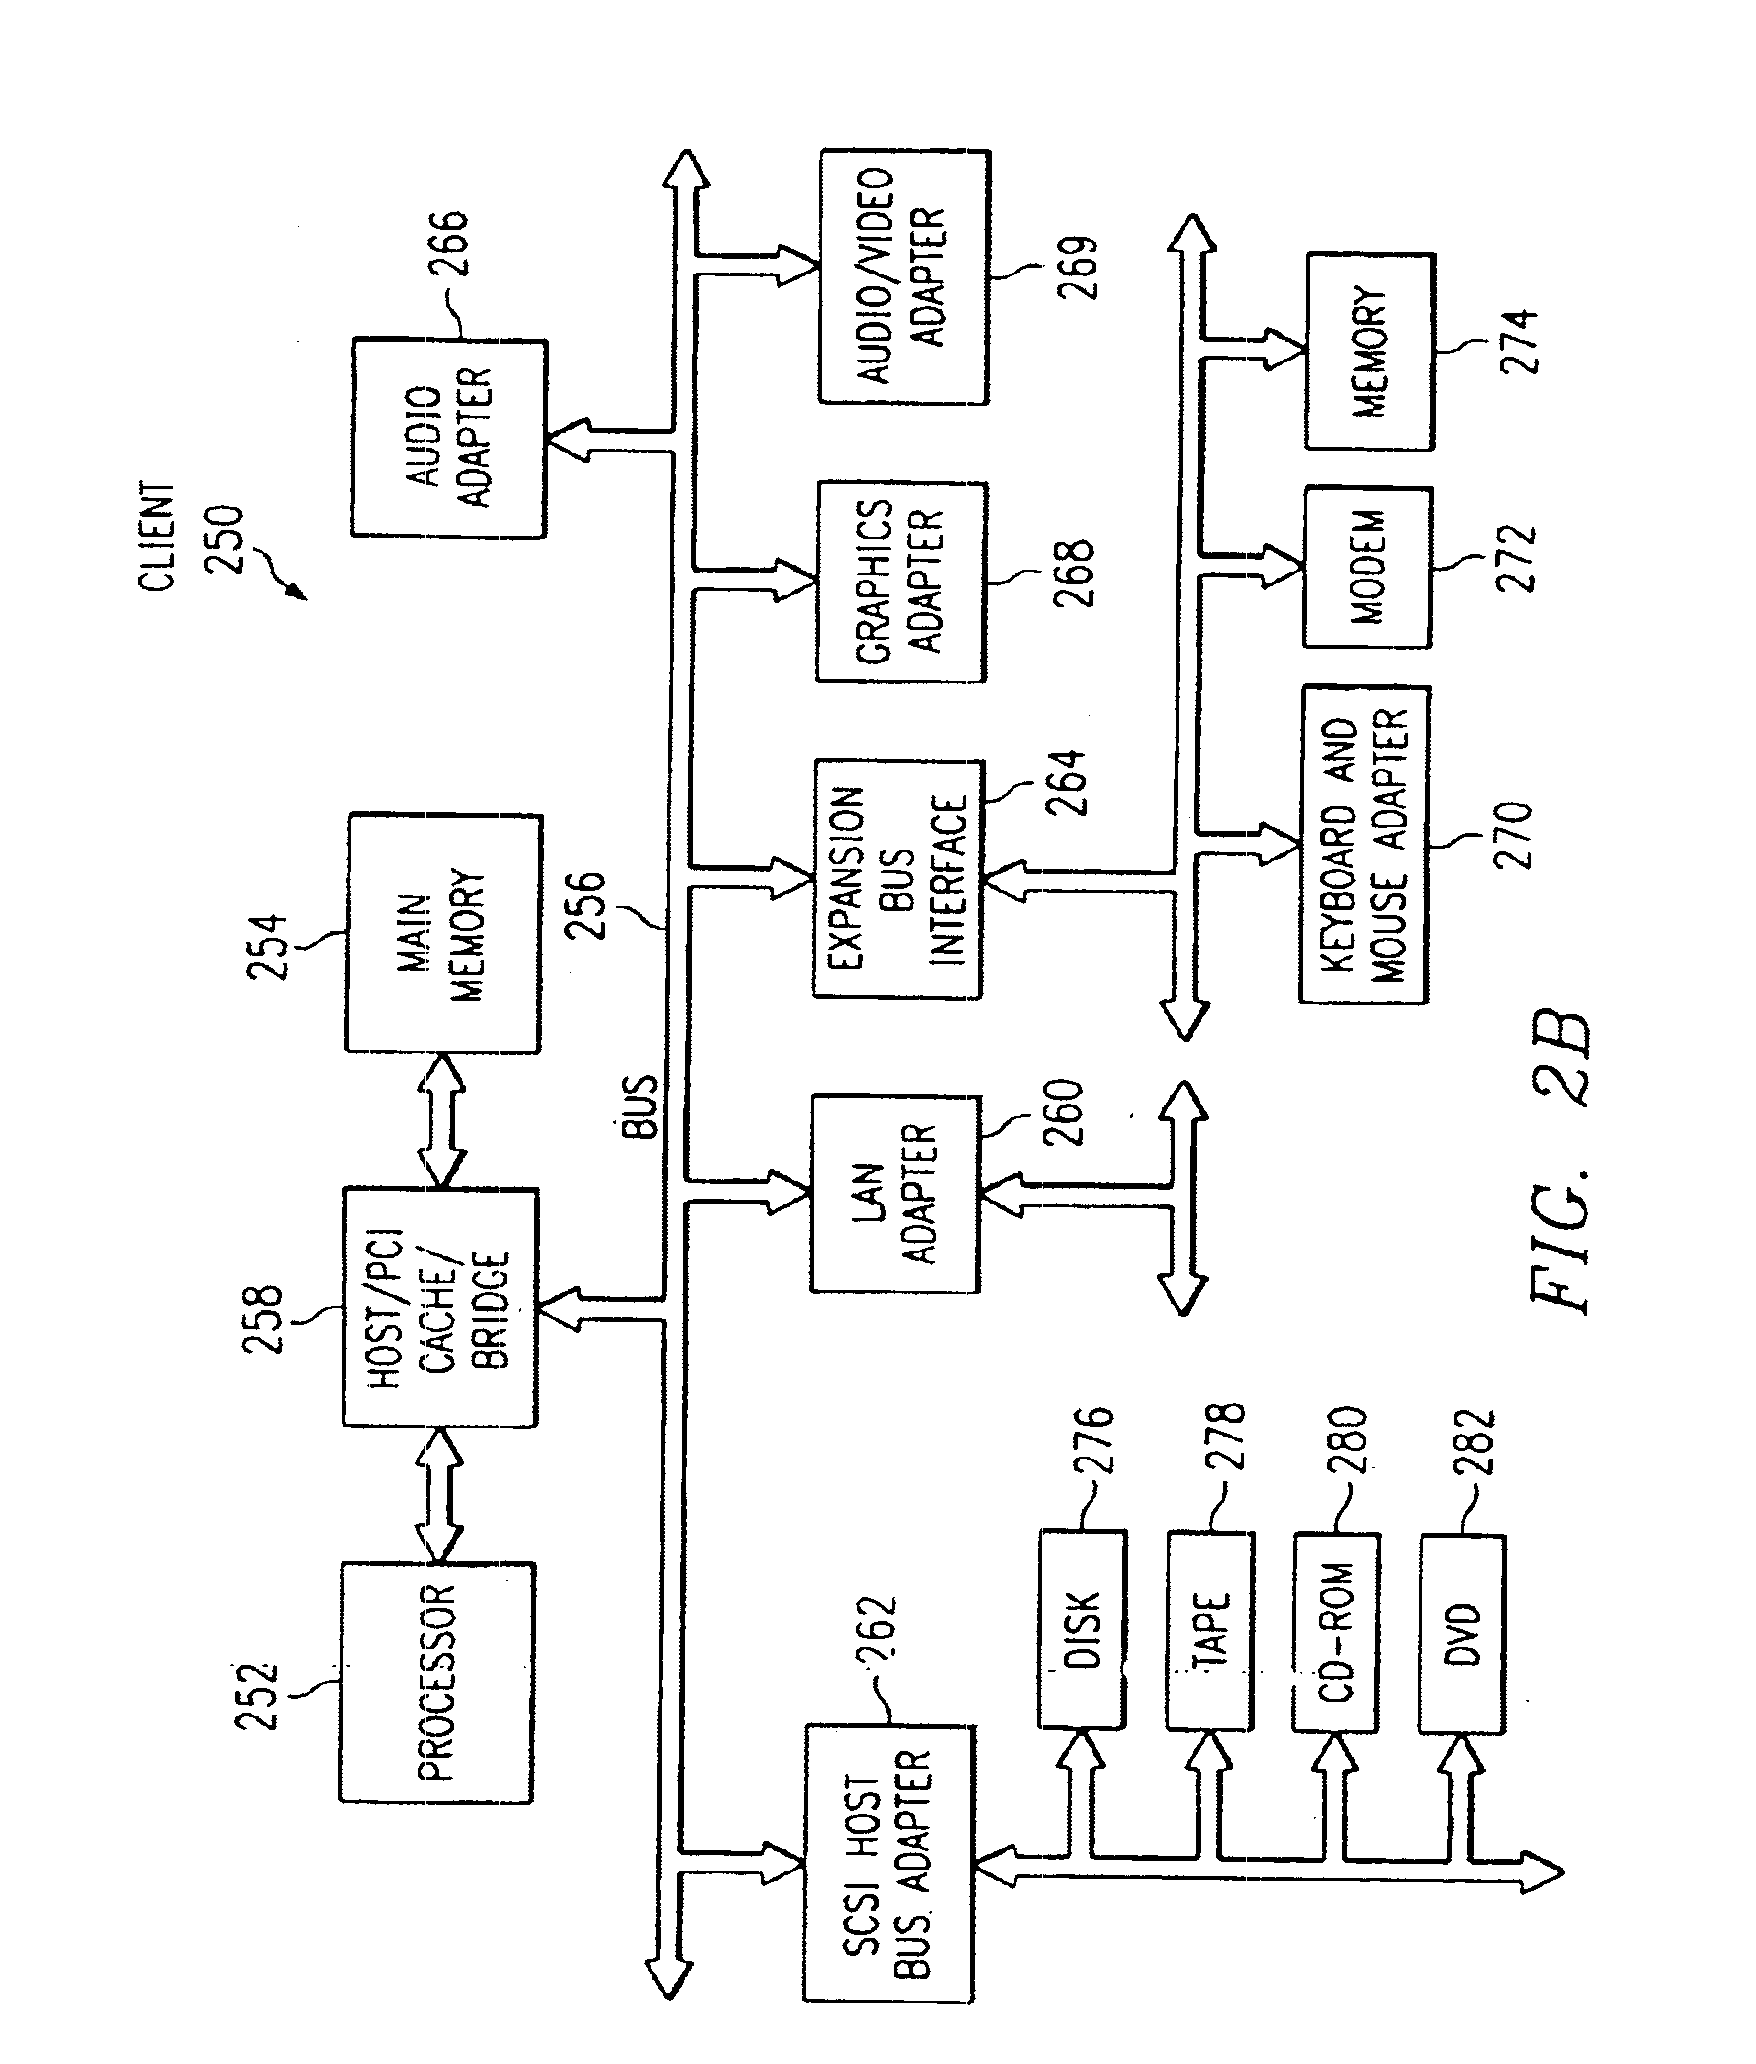 Method and system for apportioning changes in metric variables in an symmetric multiprocessor (SMP) environment